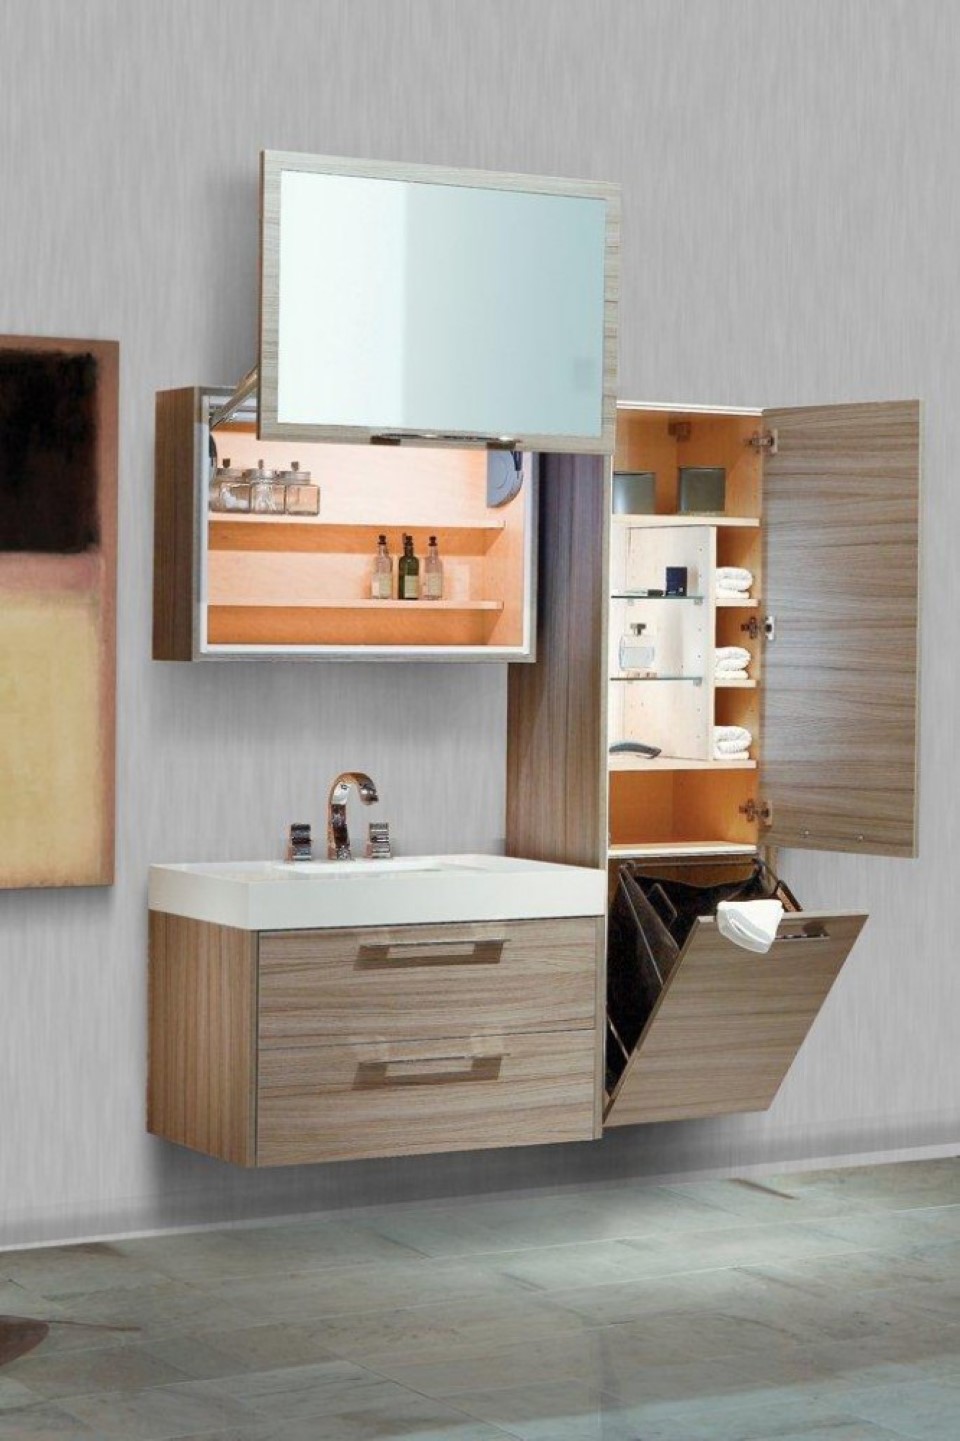 Bathroom Cabinet Lifted Outstanding Bathroom Cabinet Idea And Lifted Vanity Mirror Design Feat Stylish Small Sink  Bathroom Bathroom Cabinetry For Various Bathroom Design